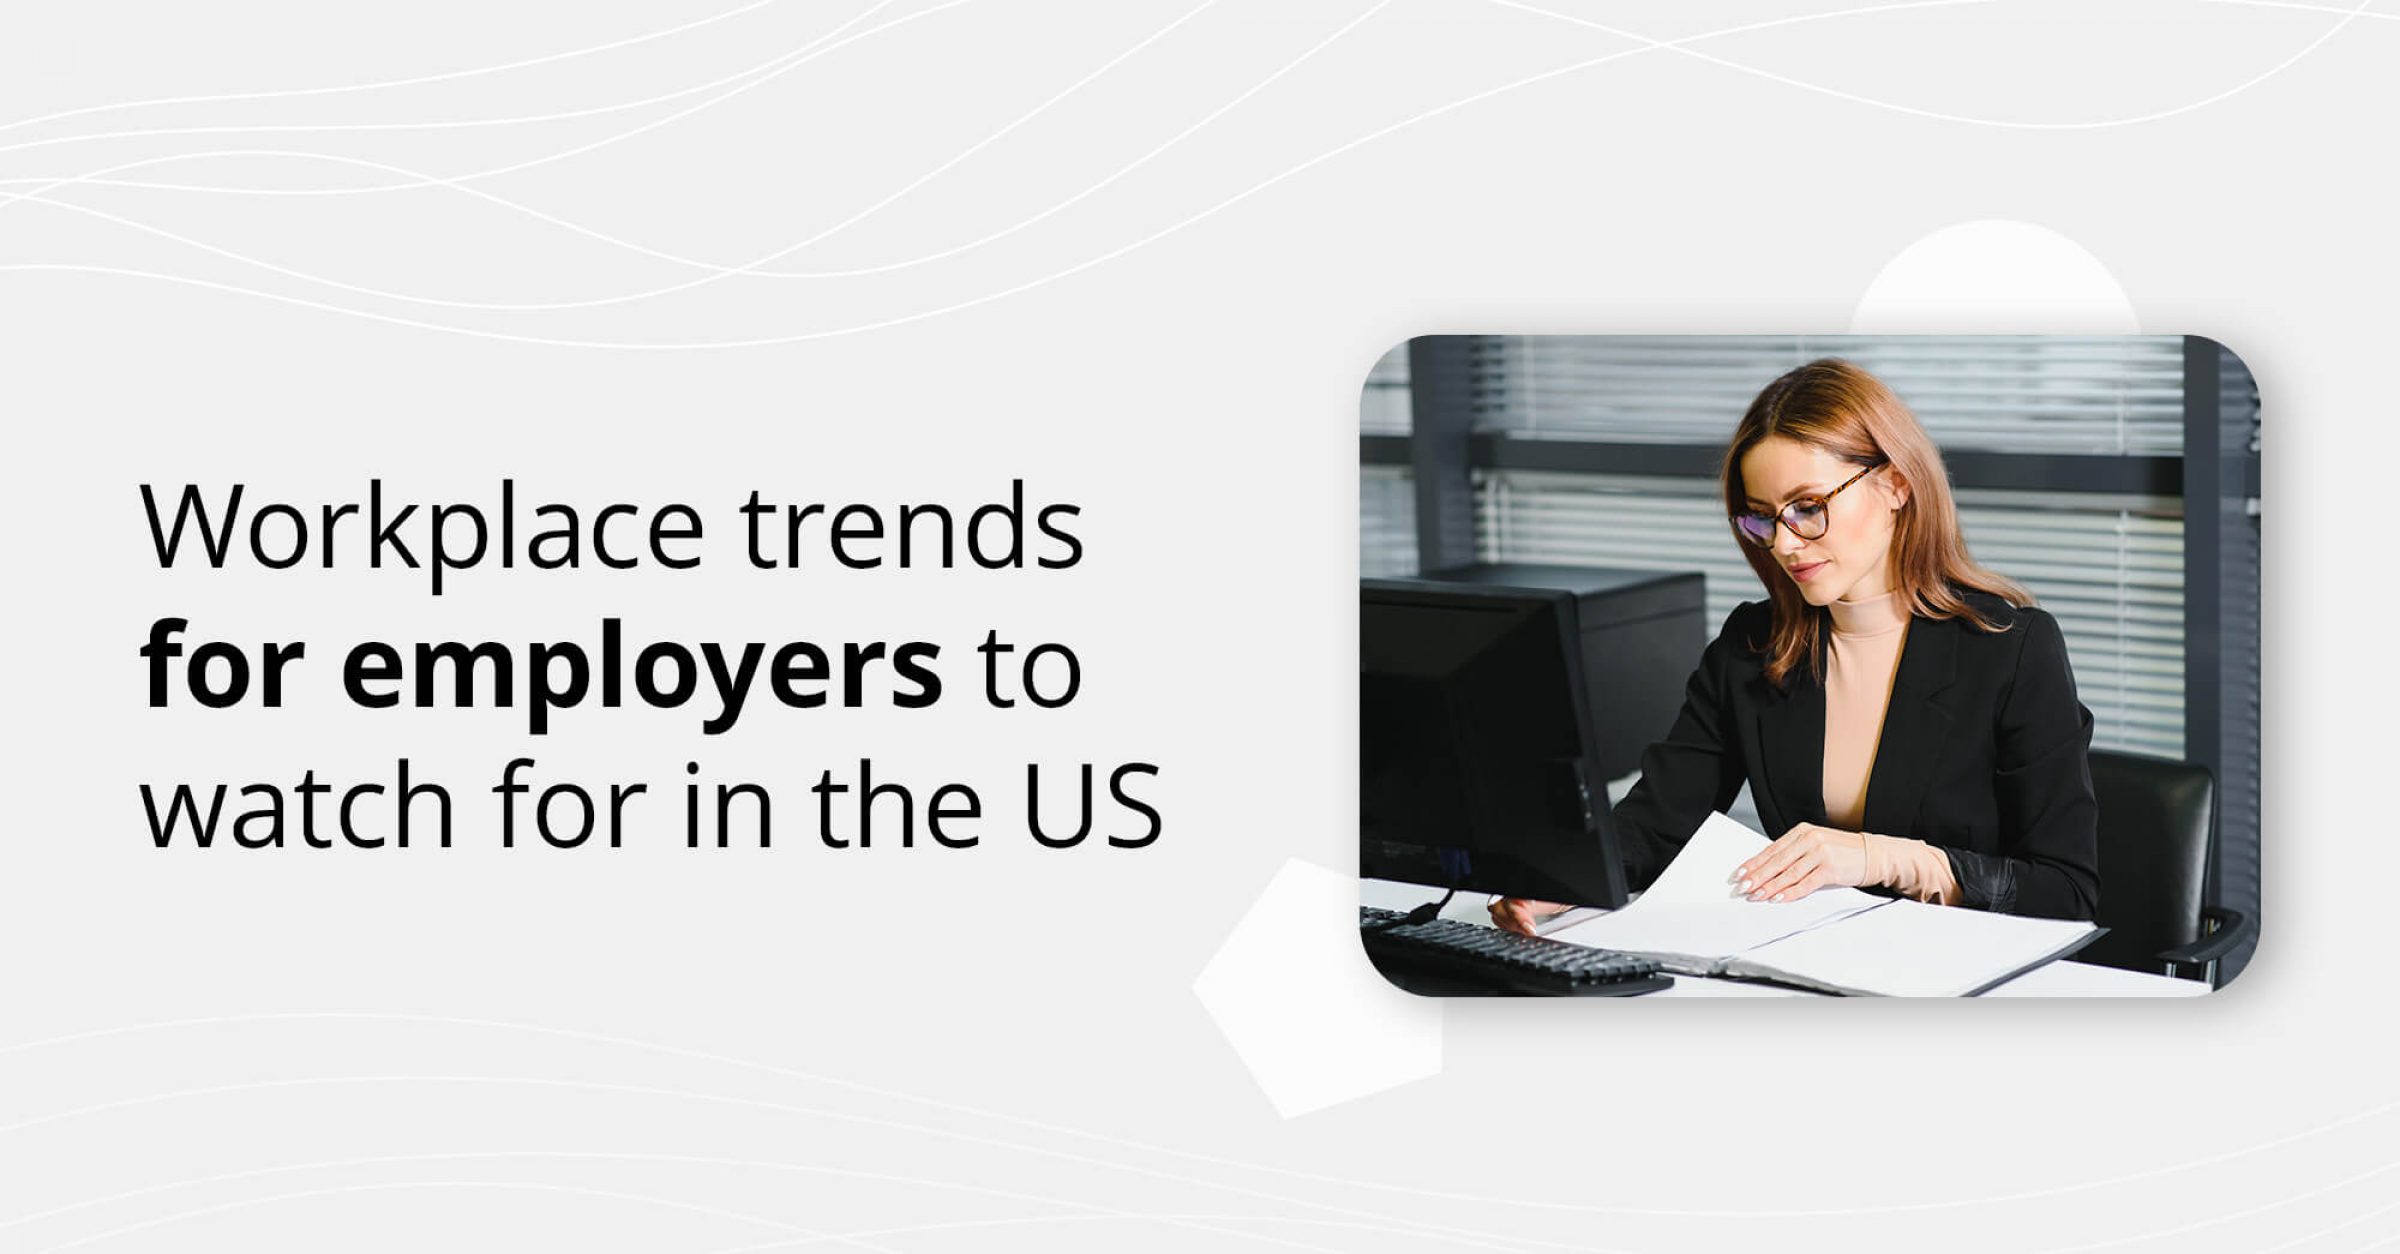 Workplace trends for employers to watch for in the US